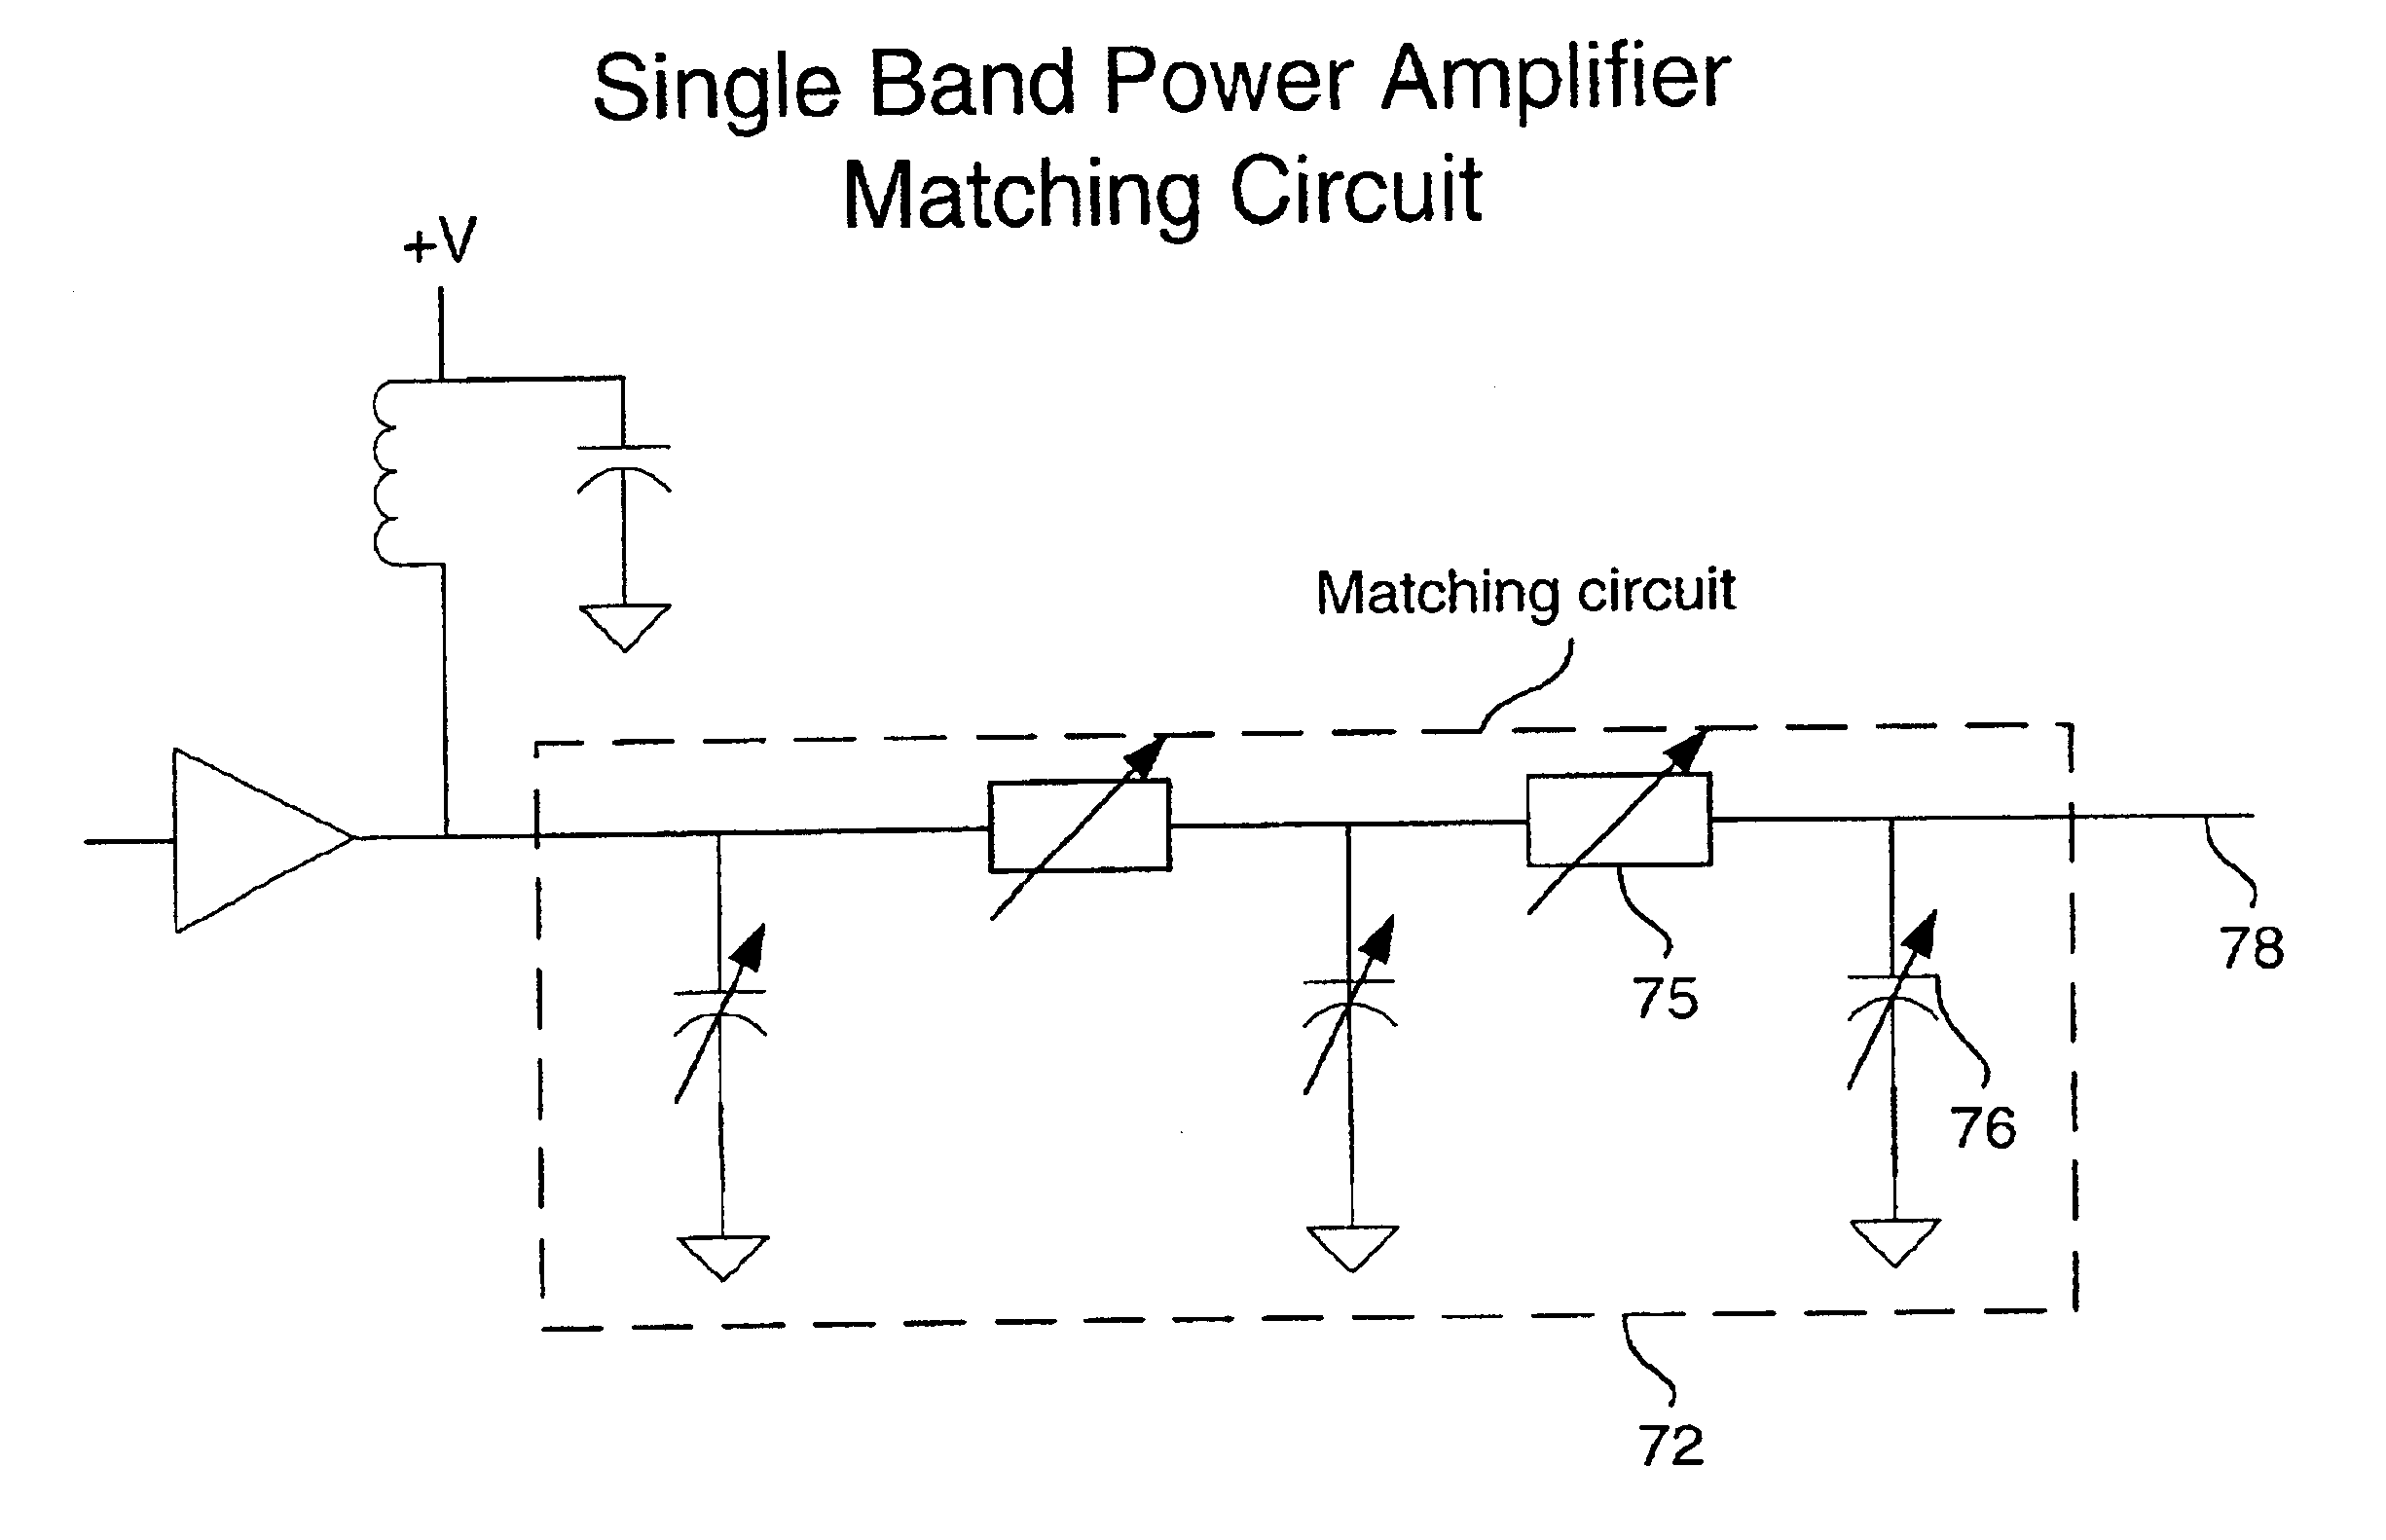 Tunable power amplifier matching circuit